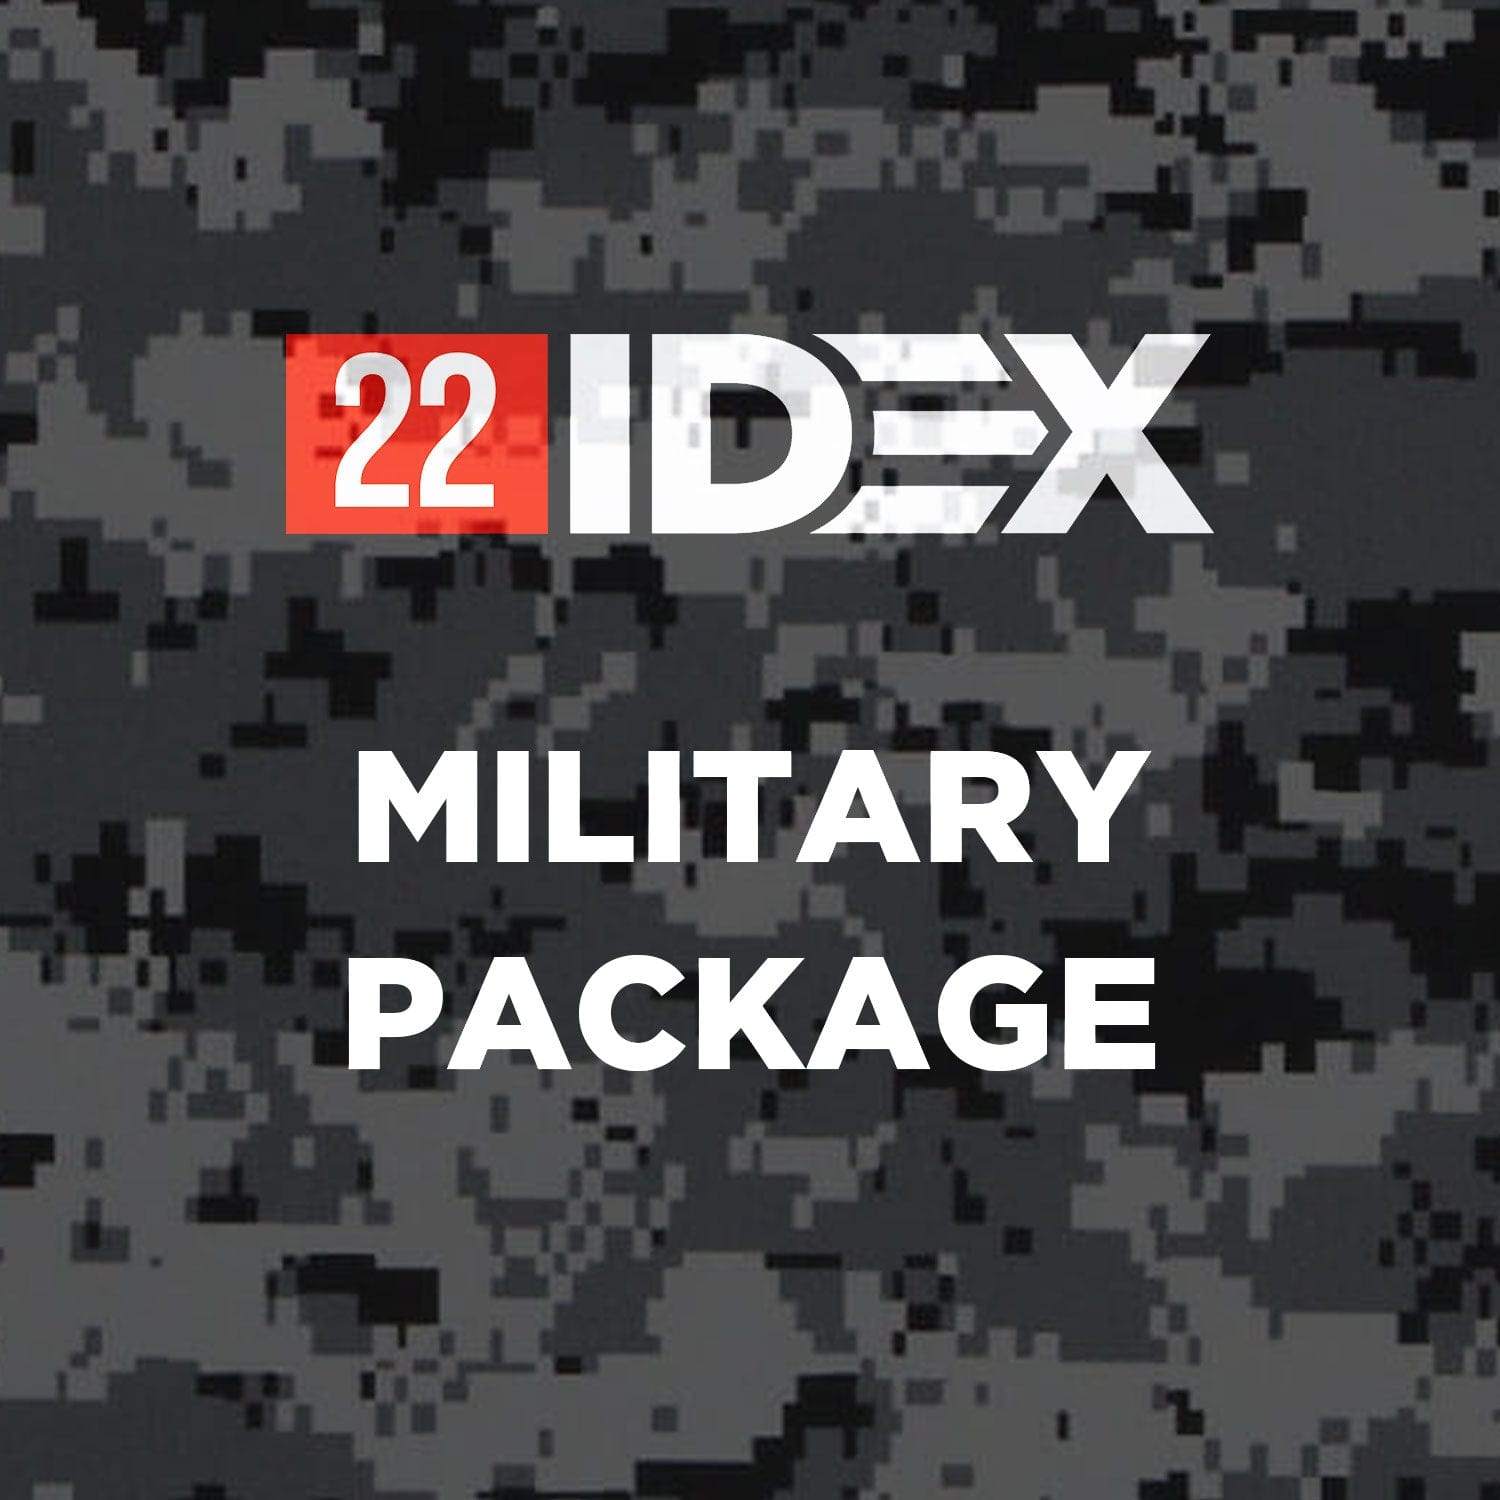 22 IDEX - Military Package Vision Miner